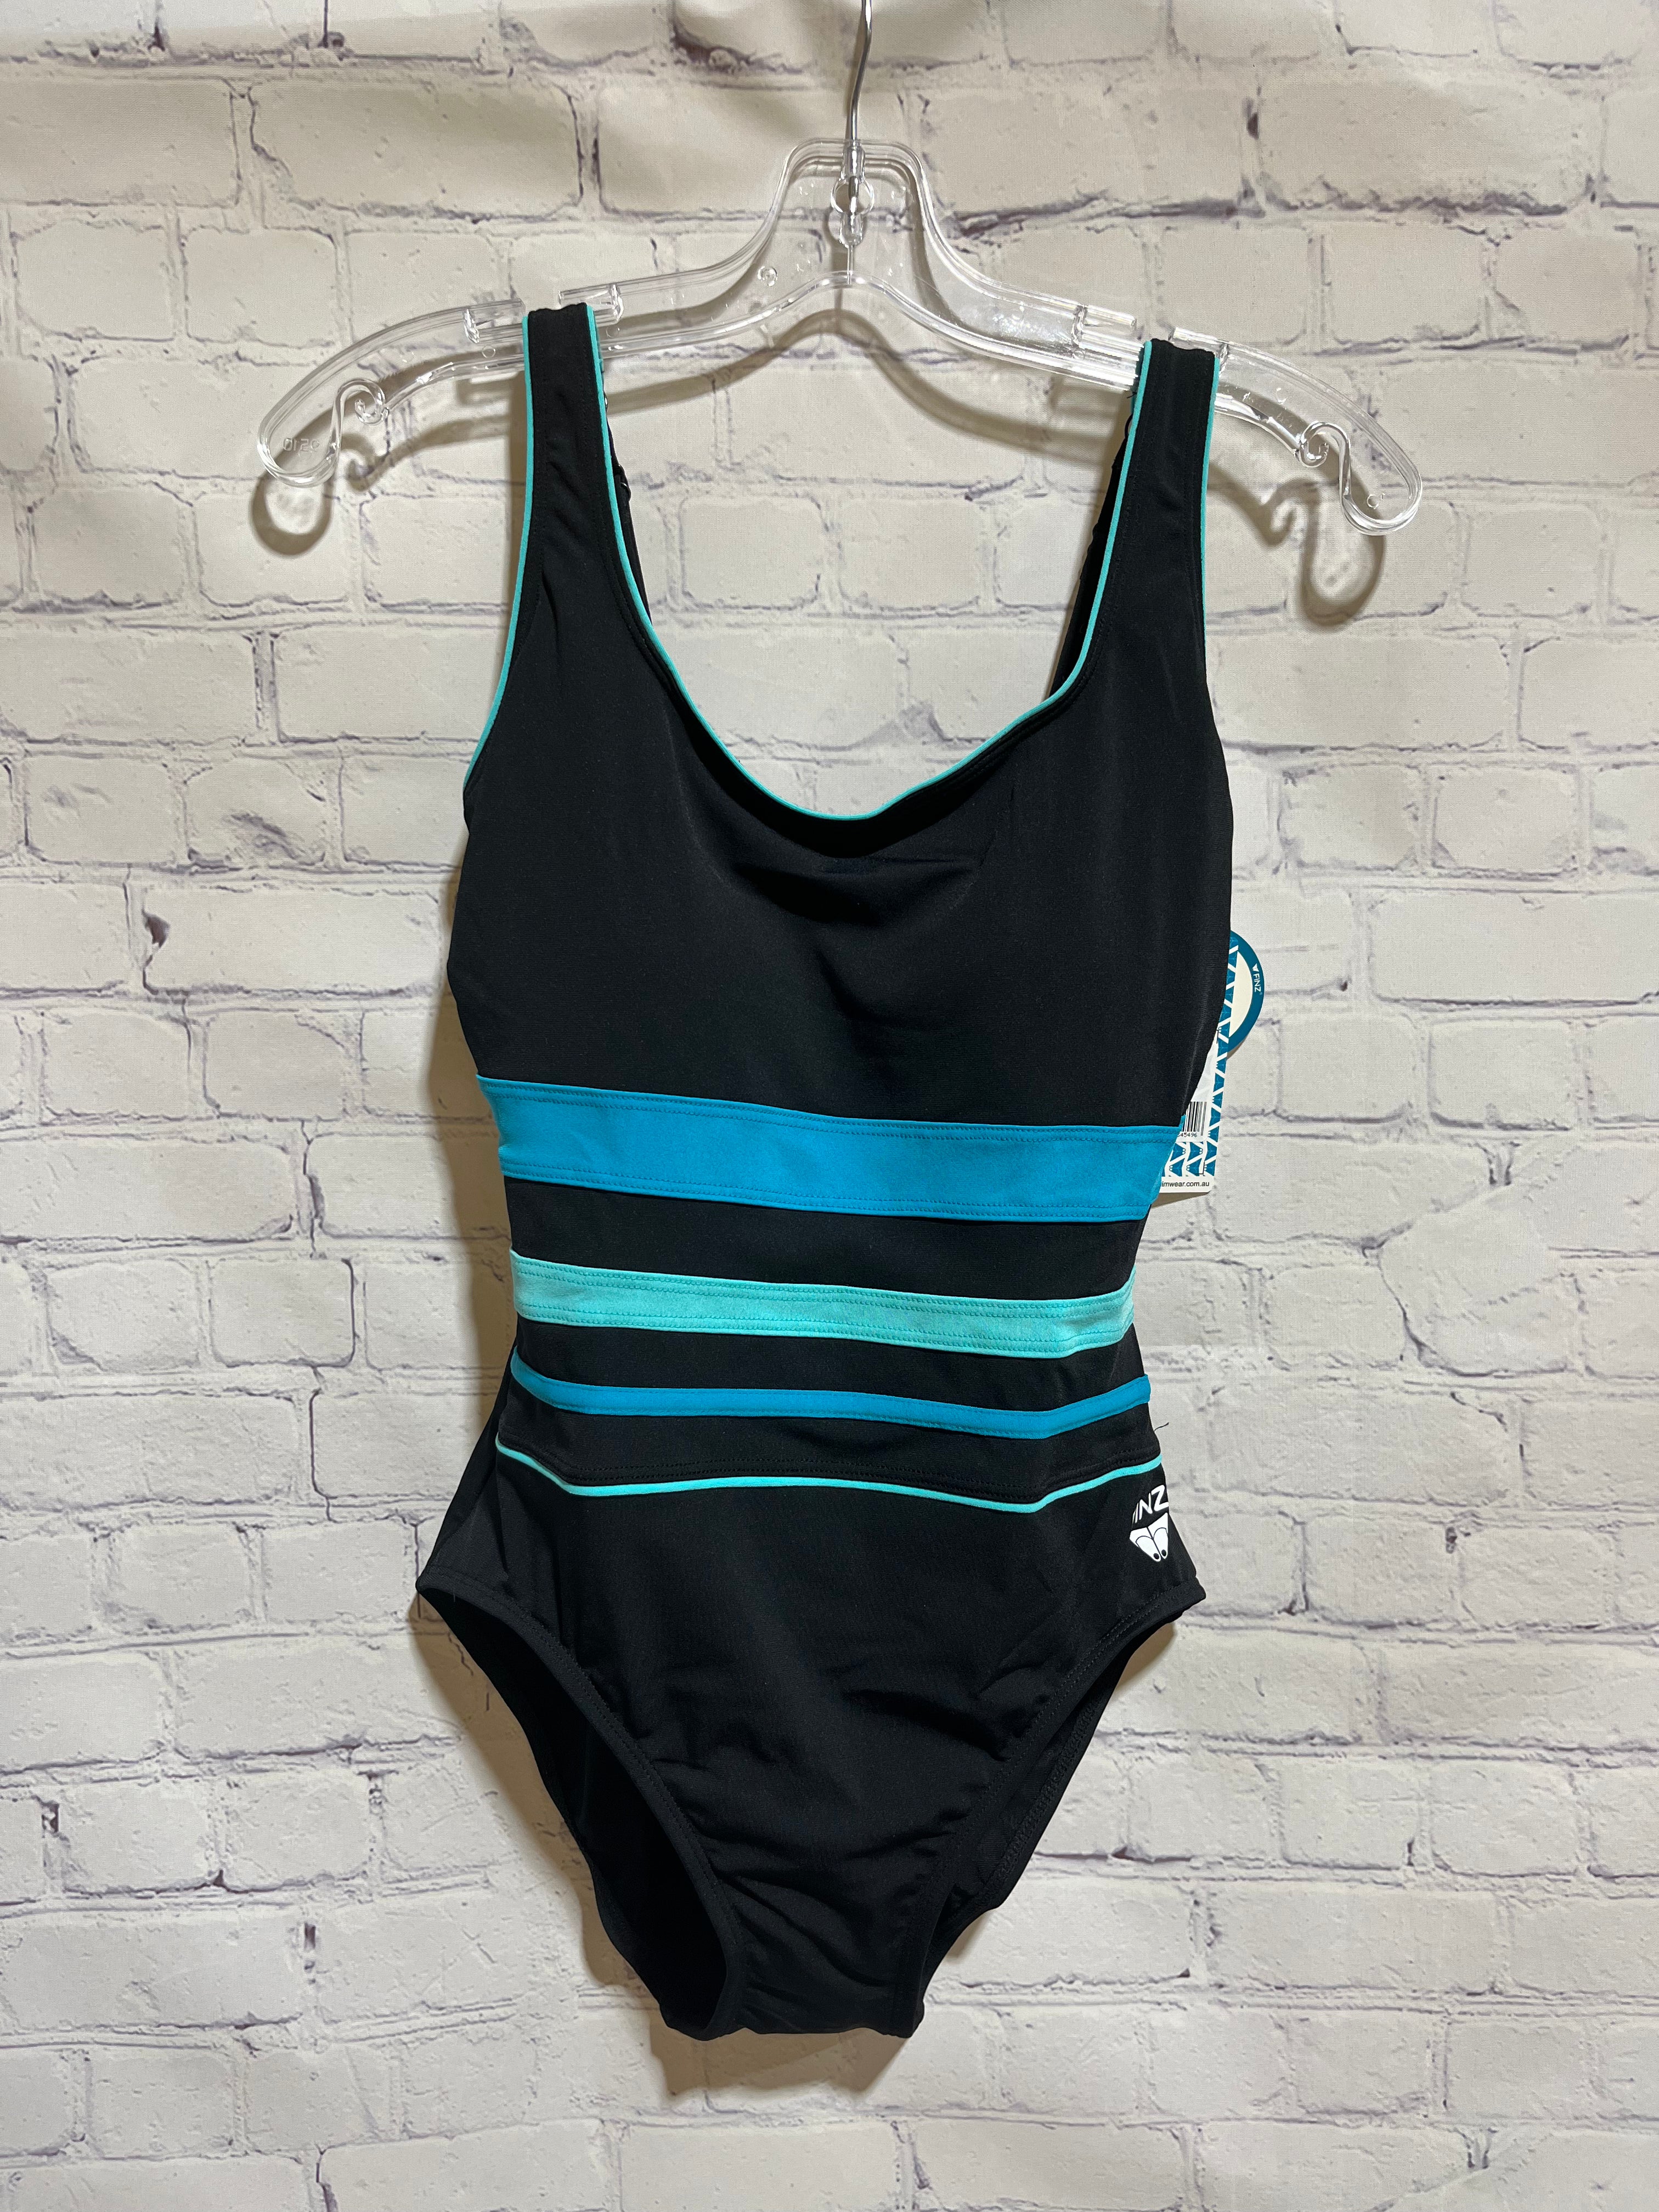 Feel and look your best on your next swim with the Finz Gradient Splice One Piece. Its classic cut and aquafit technology guarantee total comfort, while its gradient splice adds a unique style to your swimwear. Tested for 300+ hours in the pool, this one piece also features fixed cups for a secure fit and adjustable straps for extra comfort. So, dive into style and comfort with the Finz Gradient Splice One Piece!